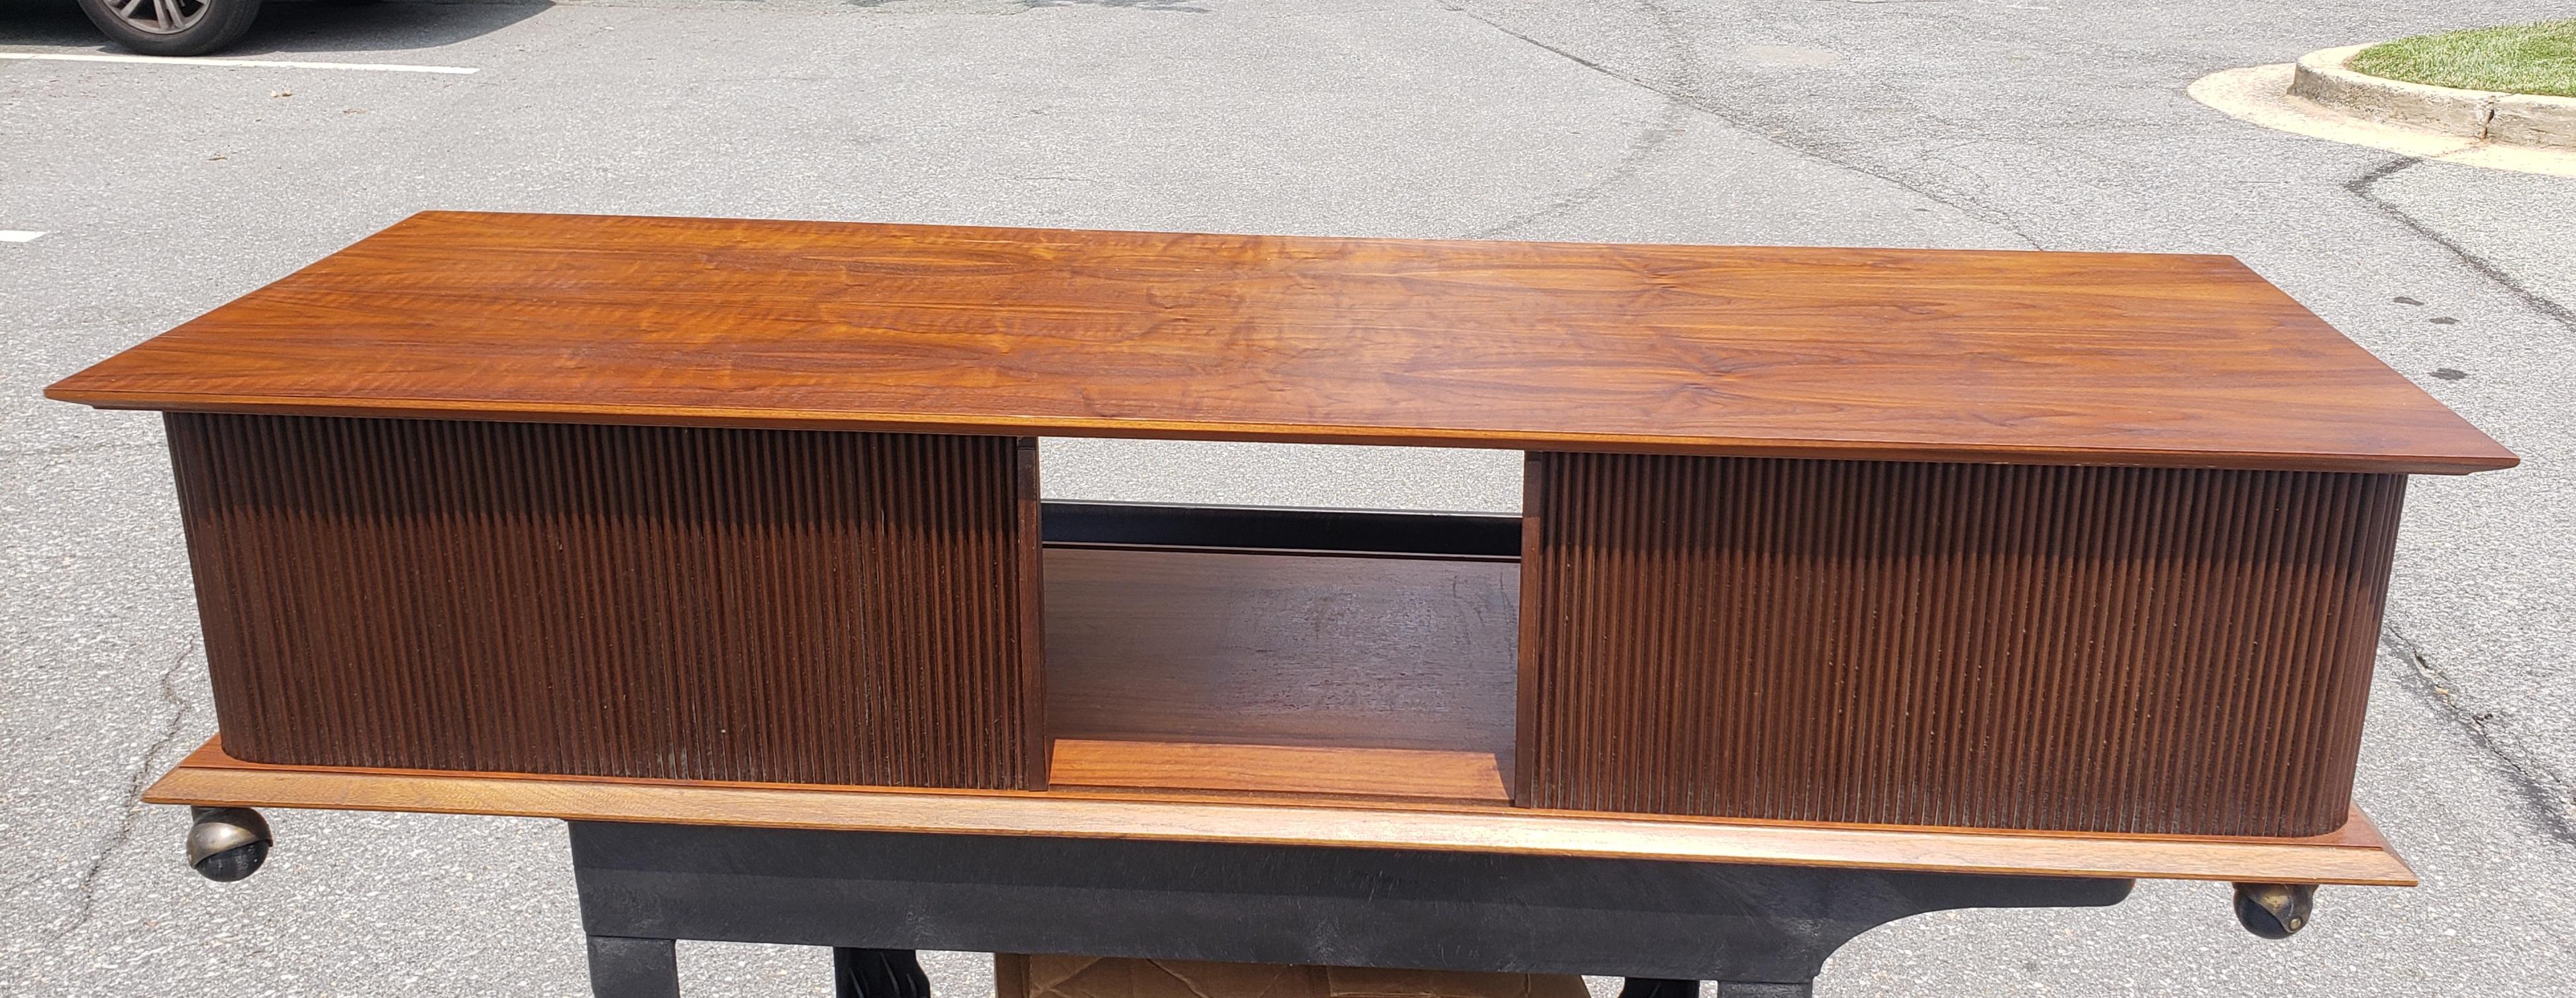 Lane Mid-Century Modern Style Teak And Tambour Door Base Rolling Coffee Table In Good Condition For Sale In Germantown, MD